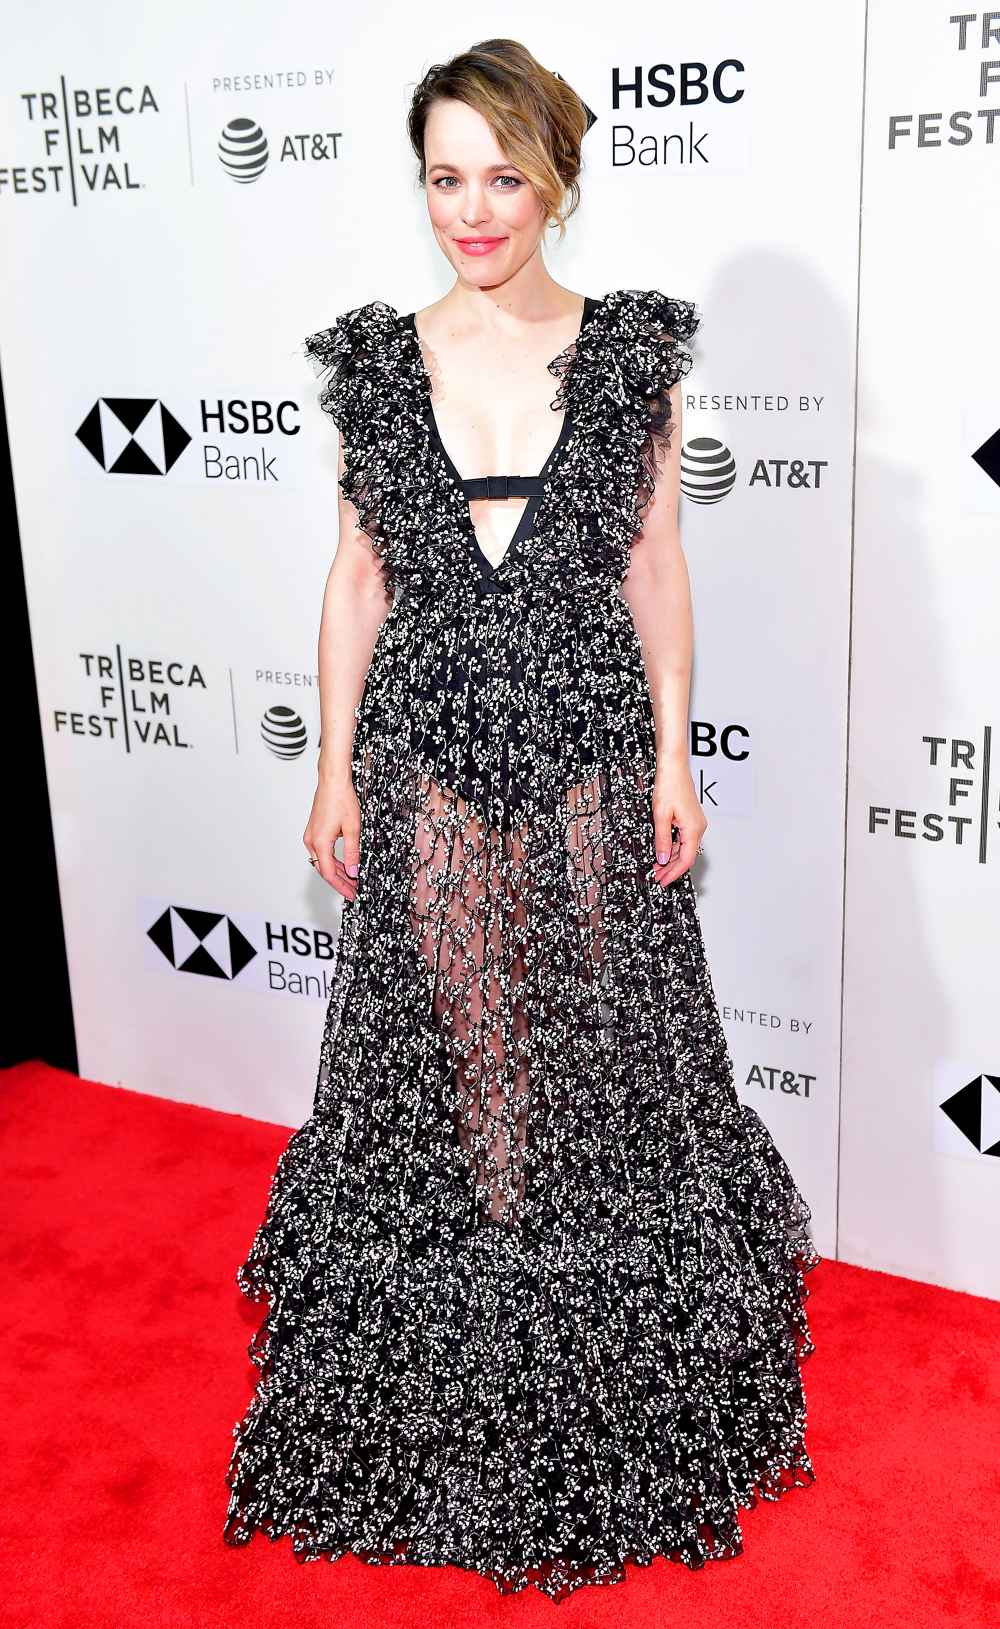 Rachel McAdams attends the "Disobedience" premiere during the 2018 Tribeca Film Festival at BMCC Tribeca PAC on April 24, 2018 in New York City.